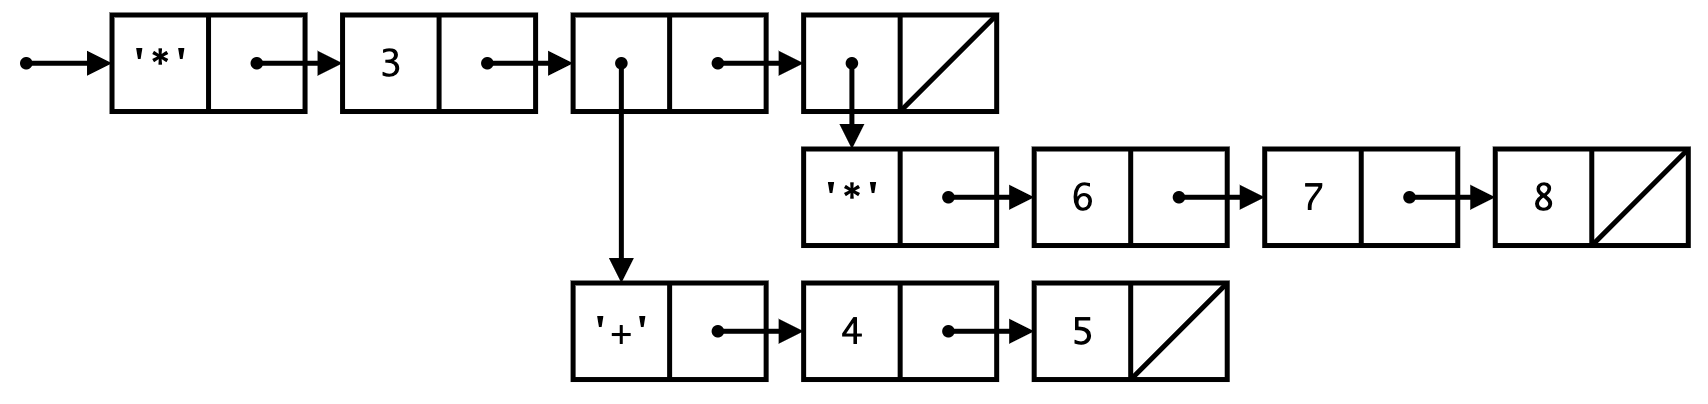 Diagram of Pairs for Calculator expression